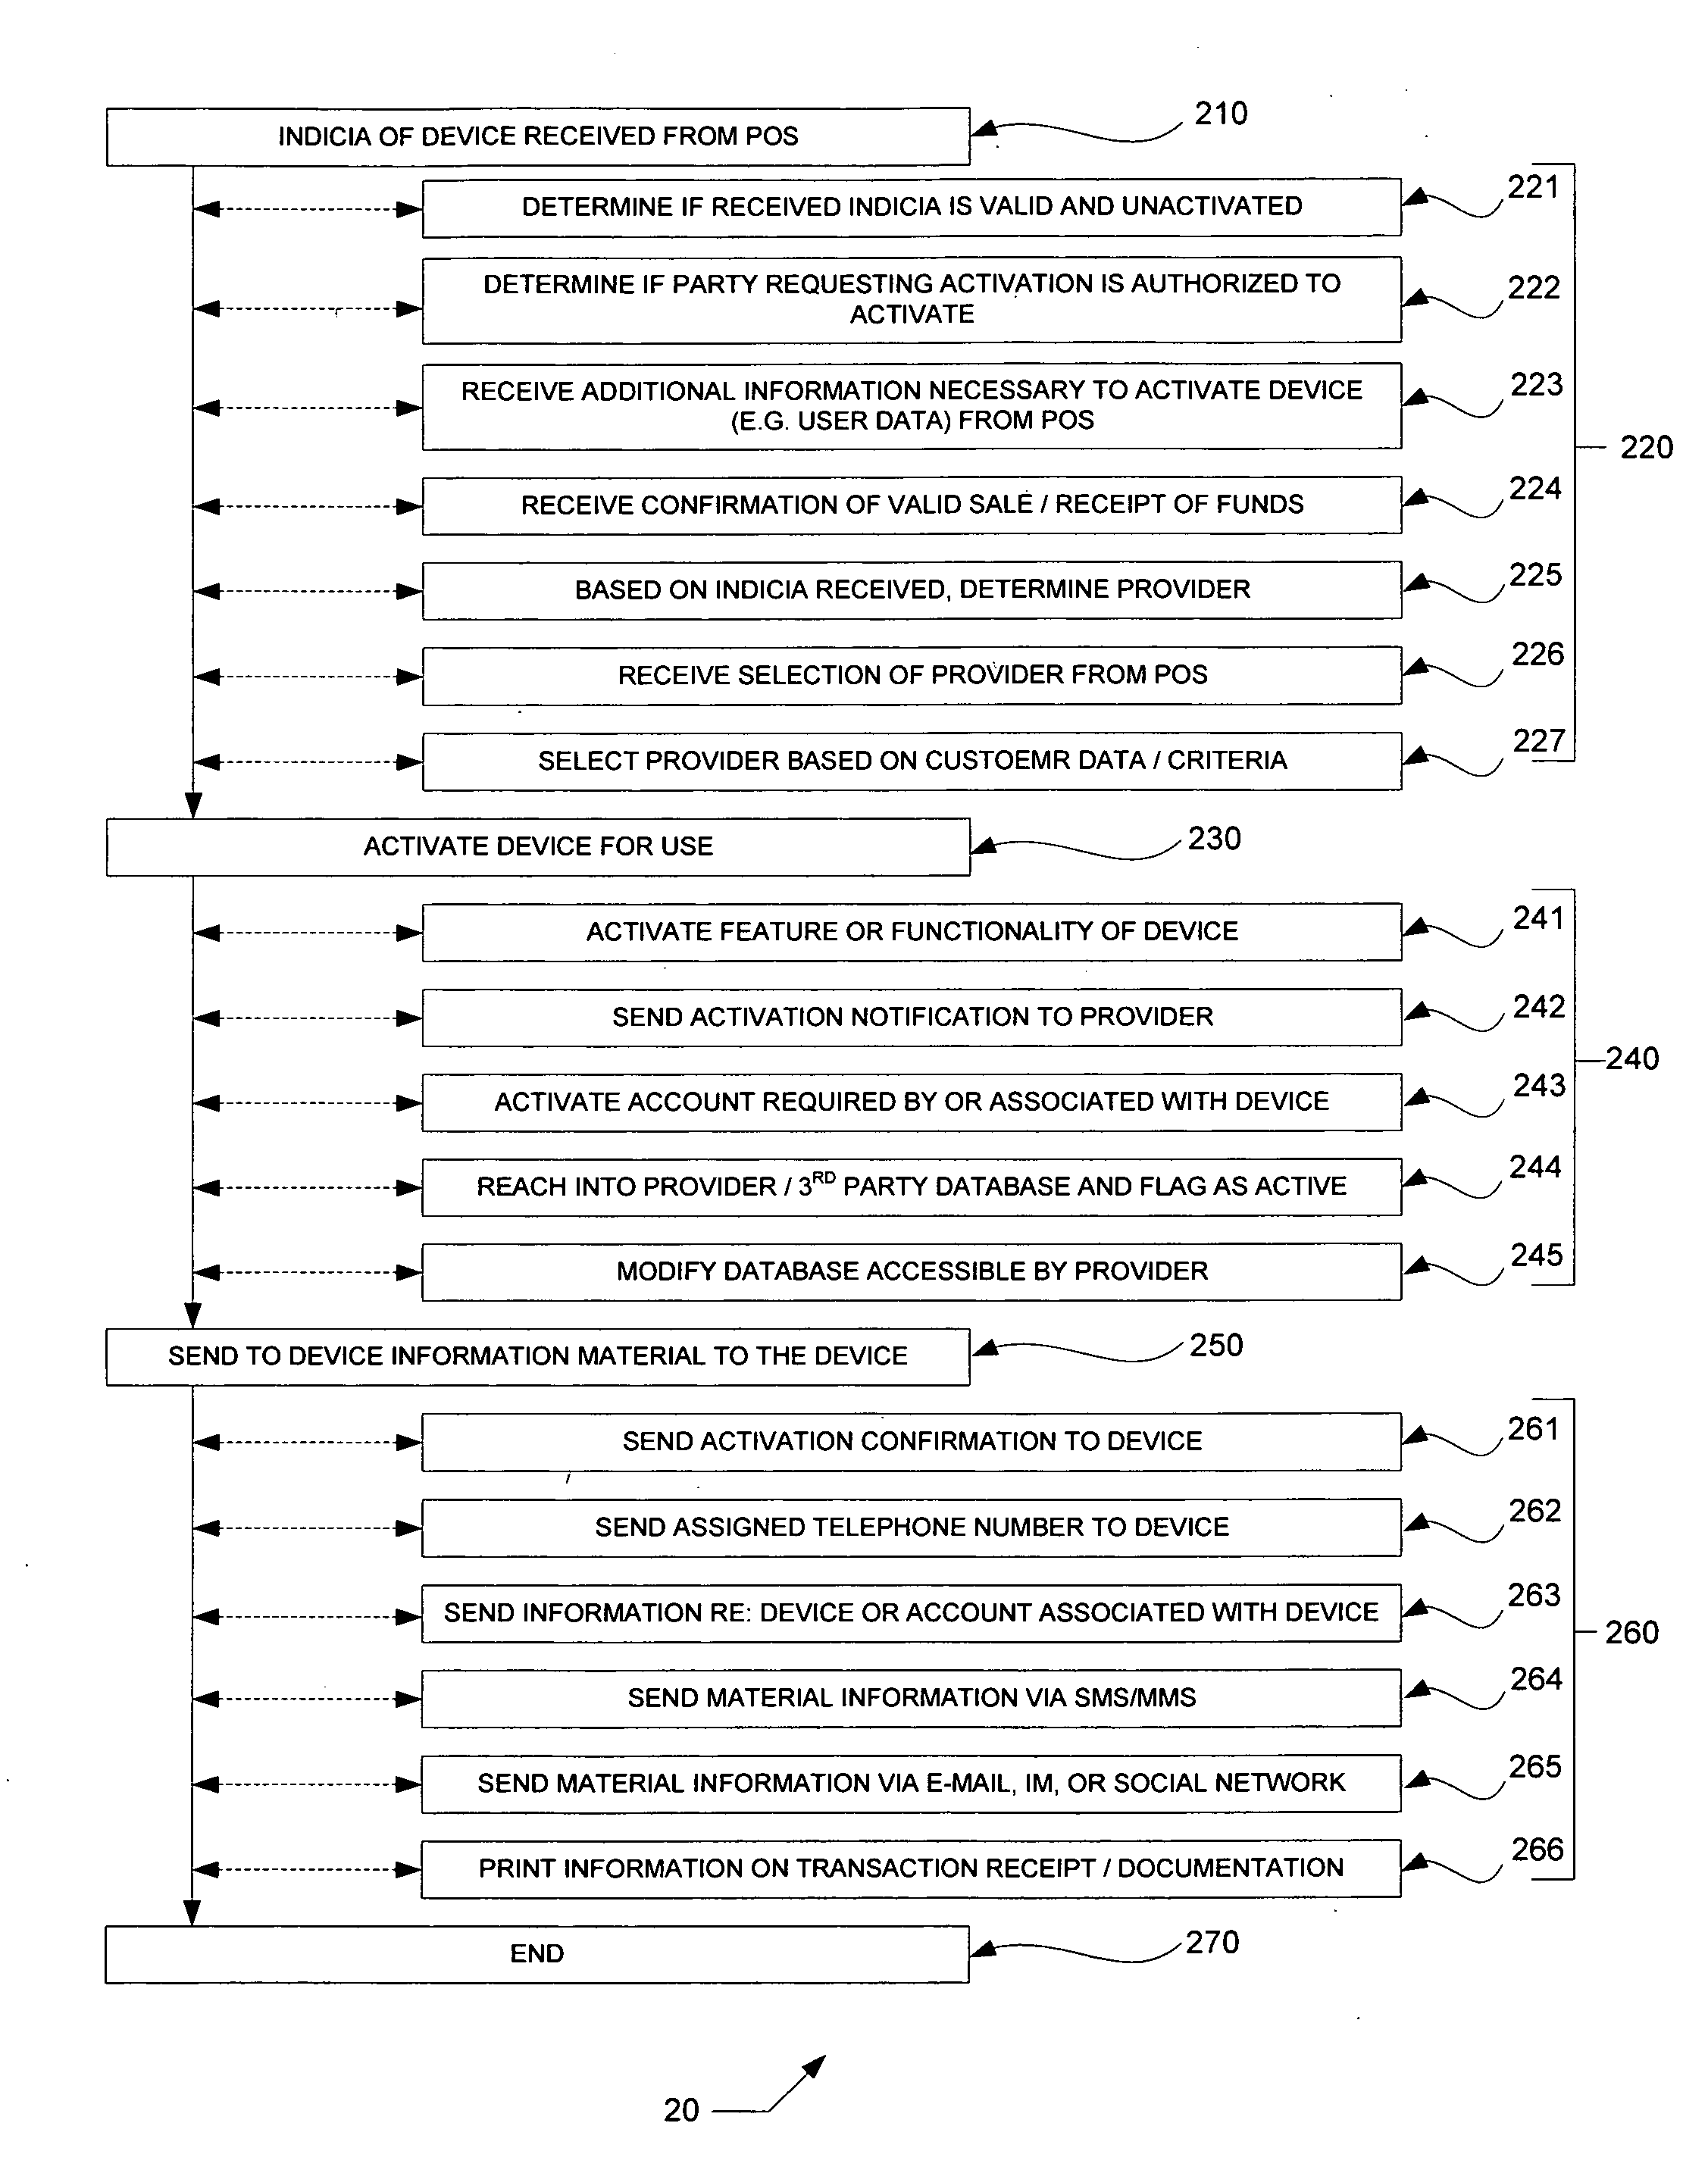 Systems and methods for electronic device point-of-sale activation